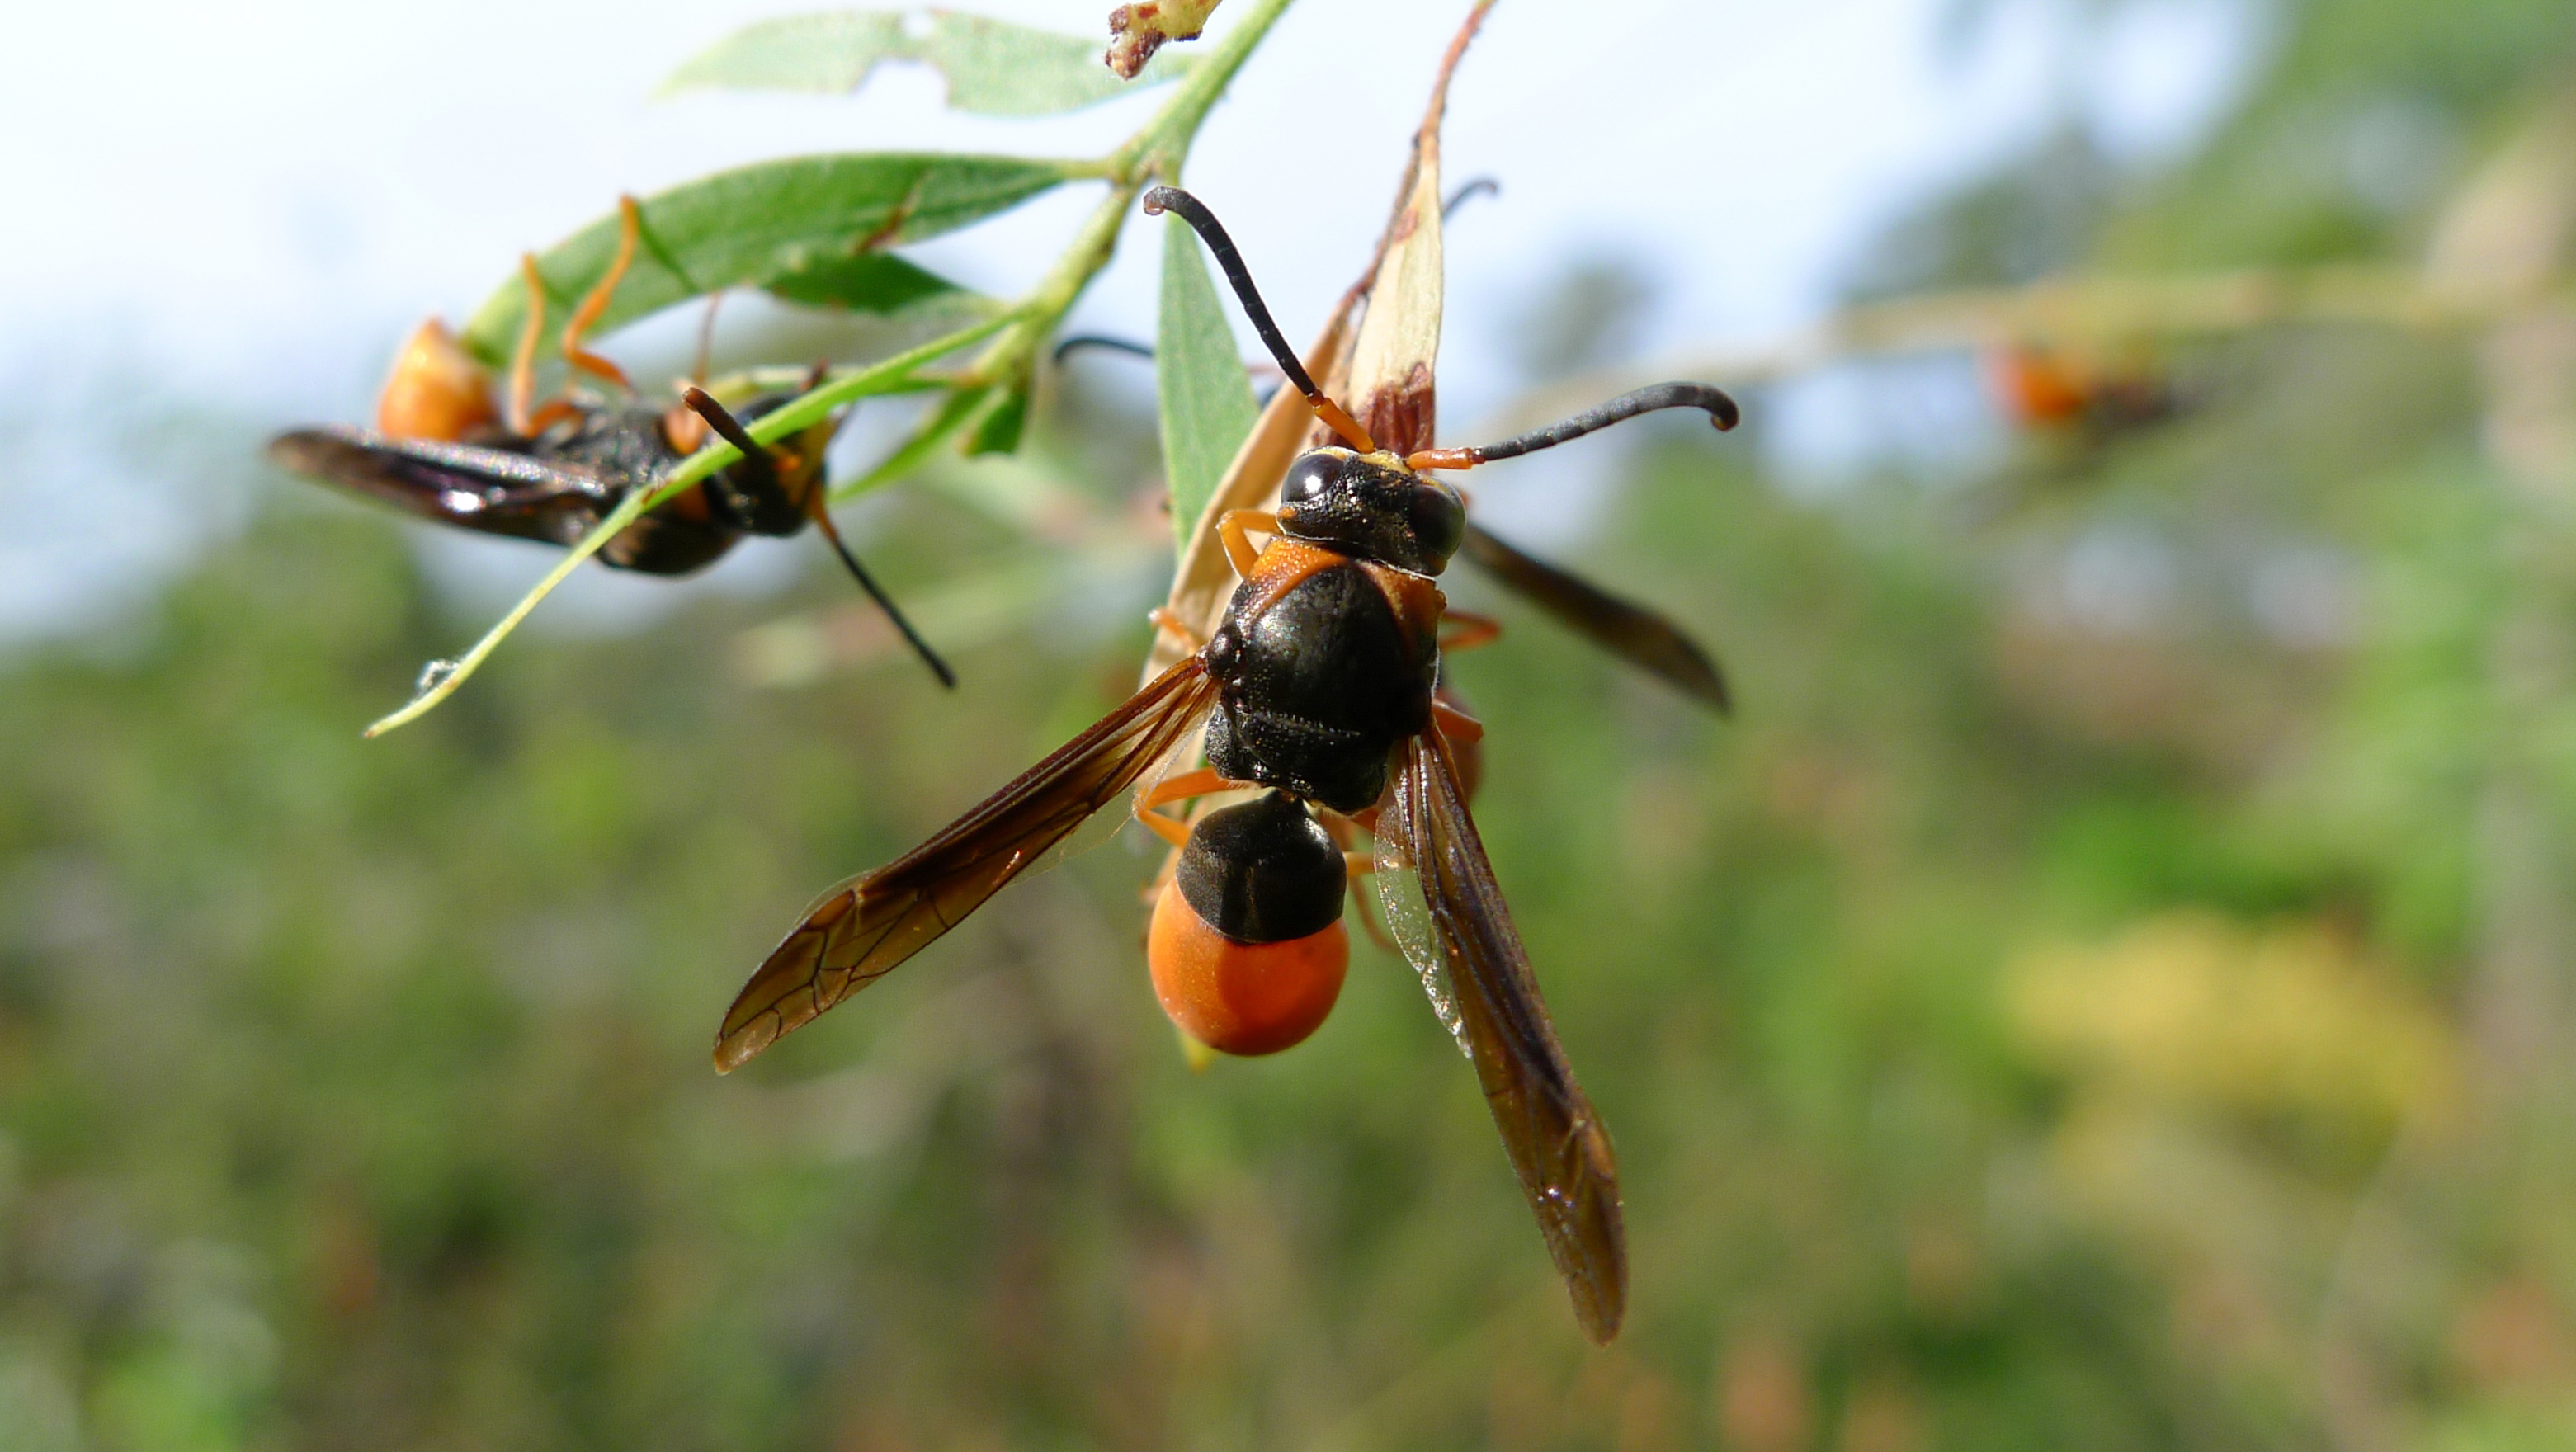 Wasps in your rental: Responsibility and treatment